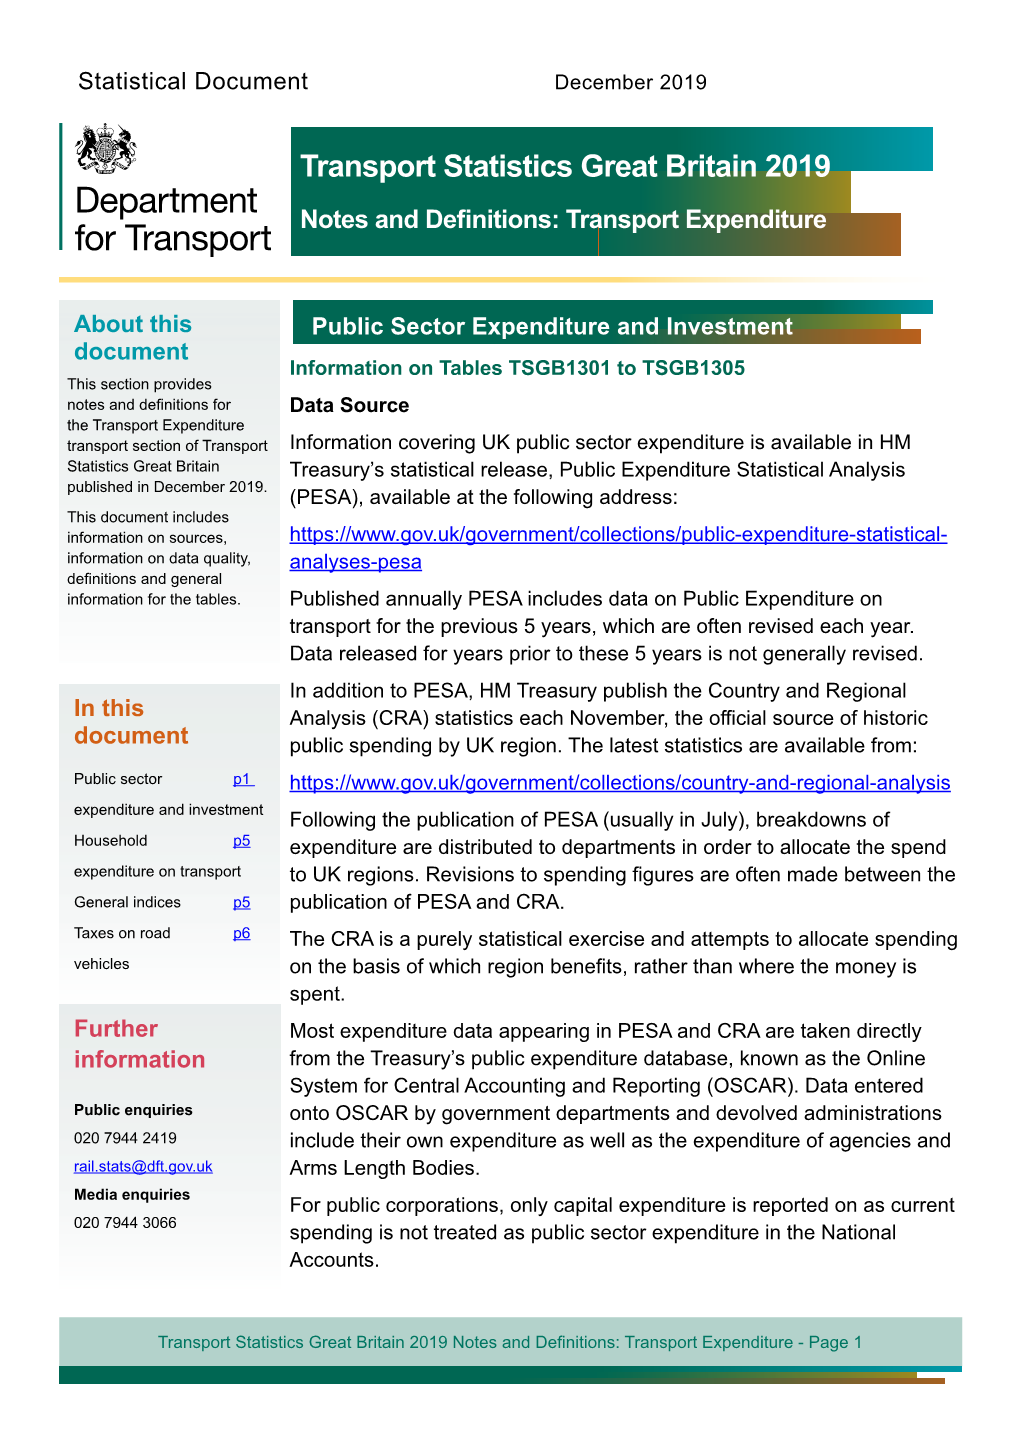 Transport Expenditure: Notes and Definitions